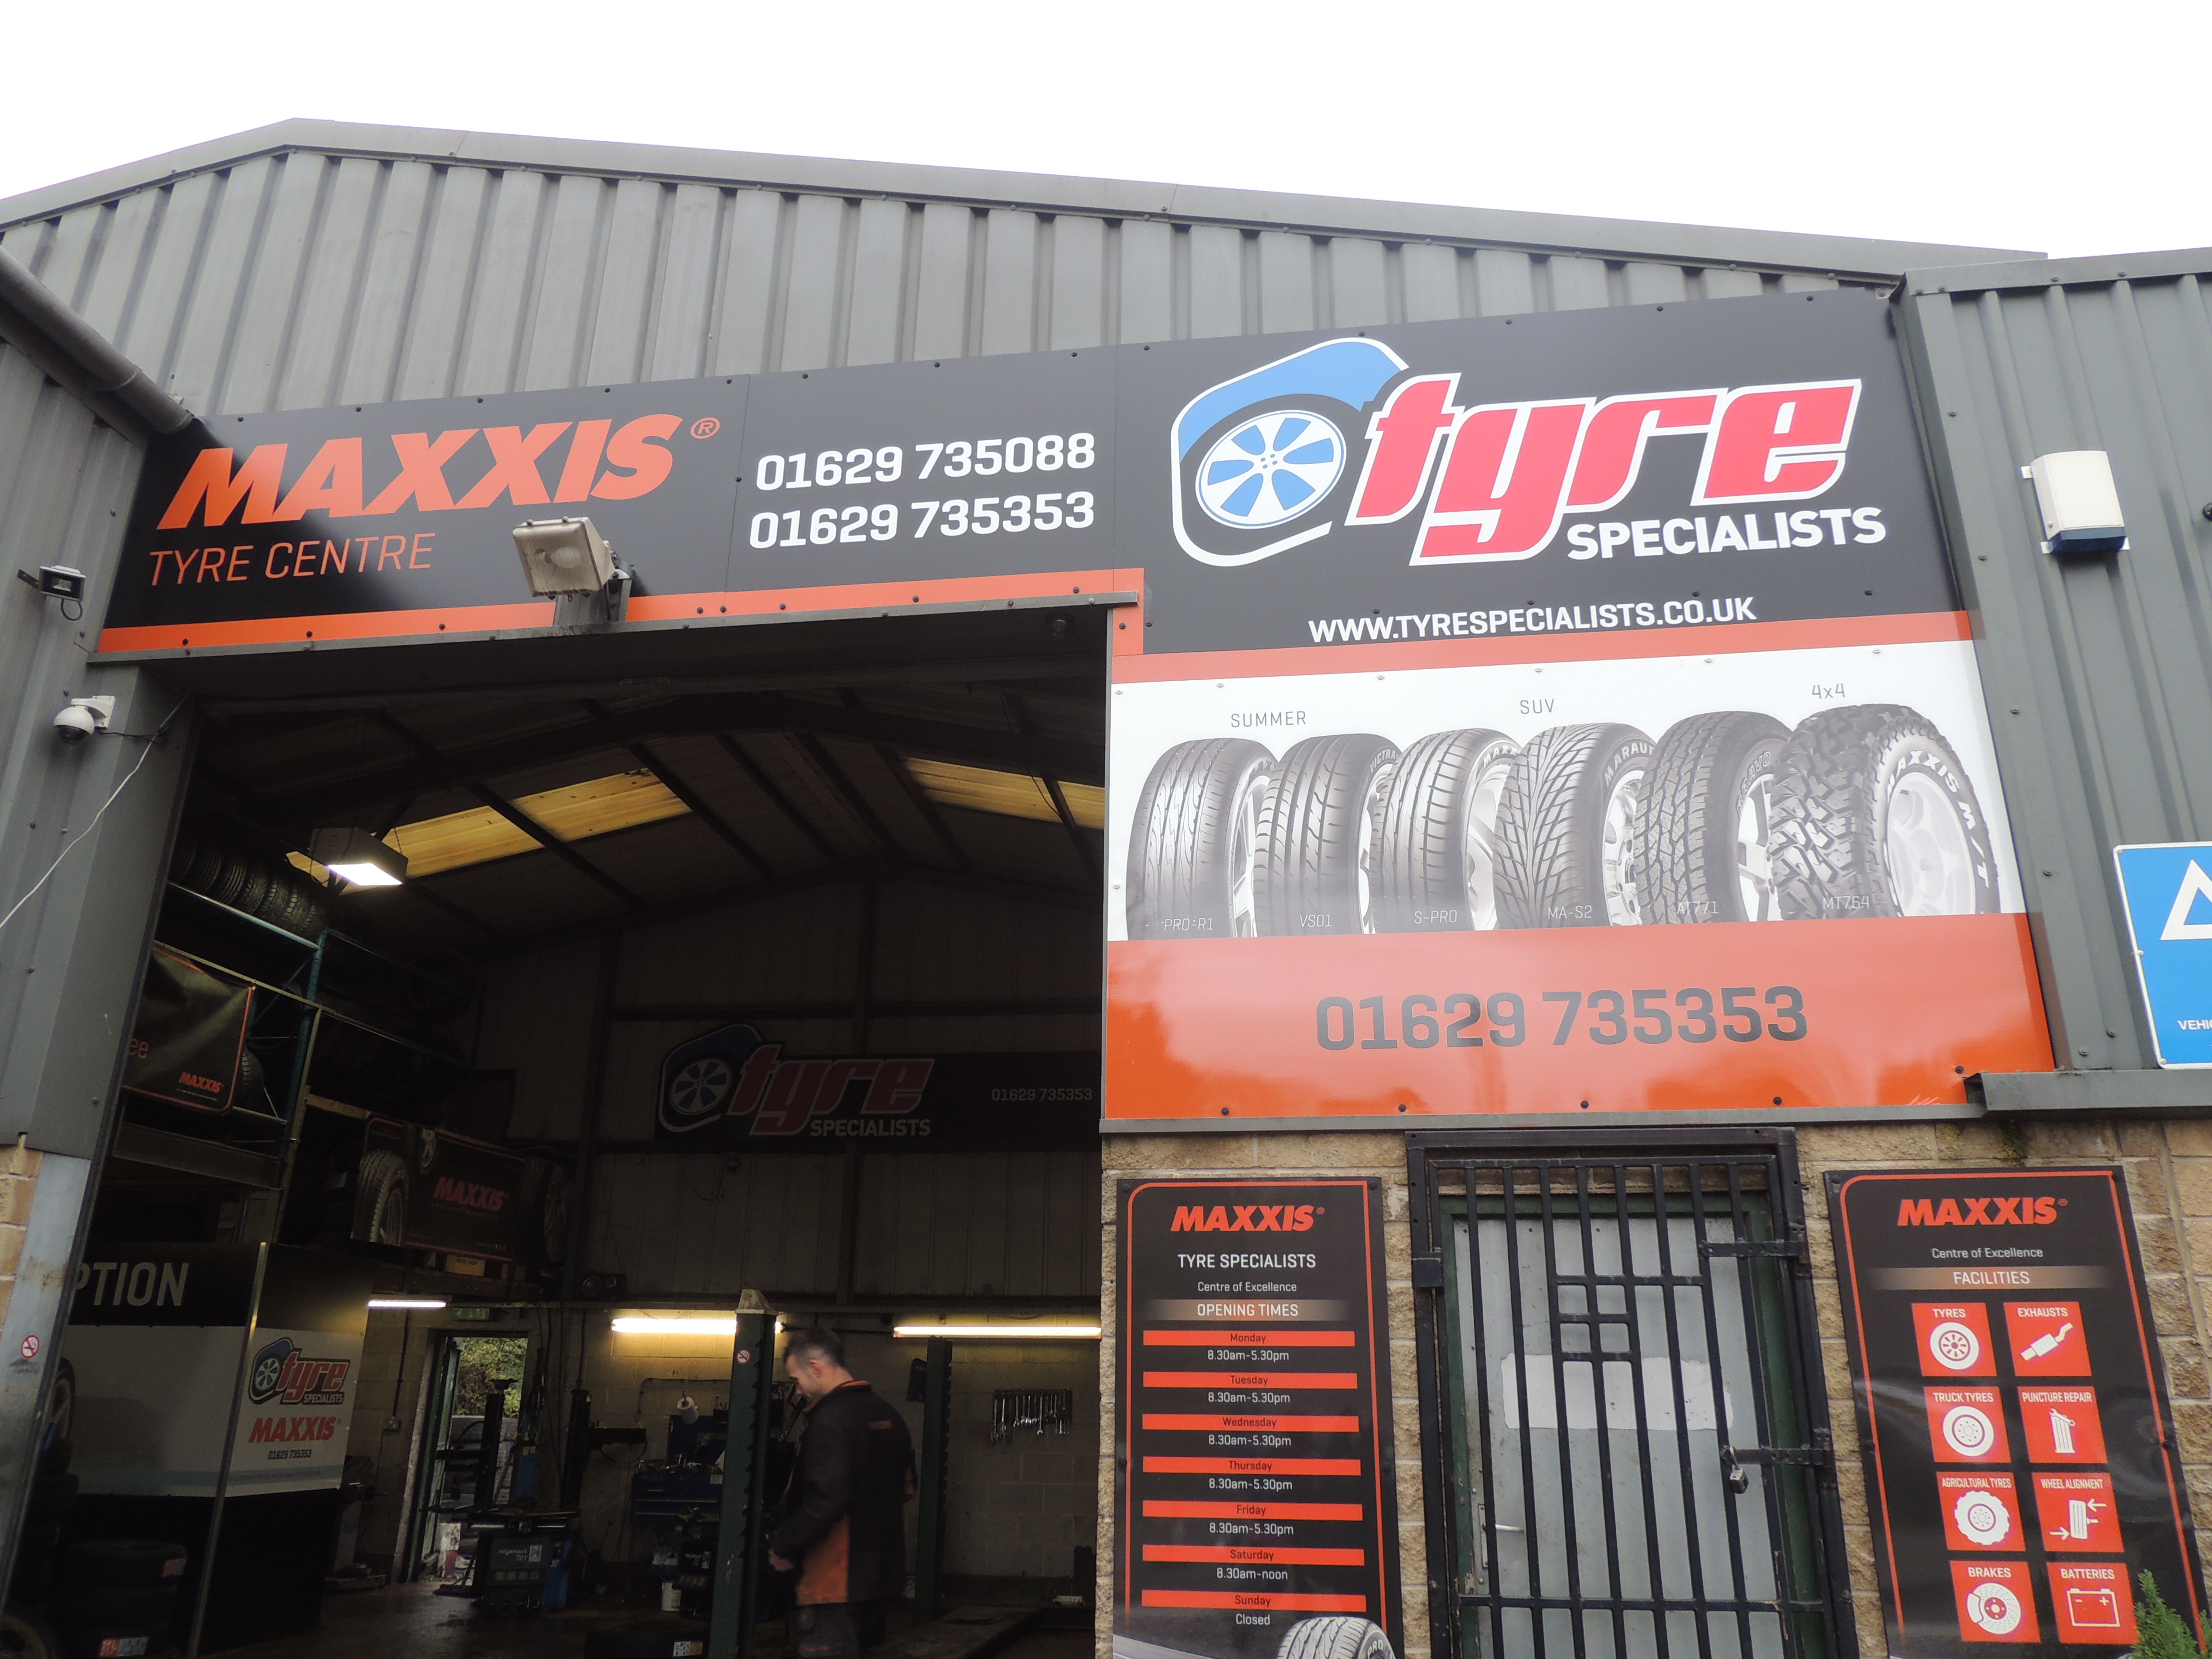 Tyre Specialists in Maxxis Centre of Excellence revamp